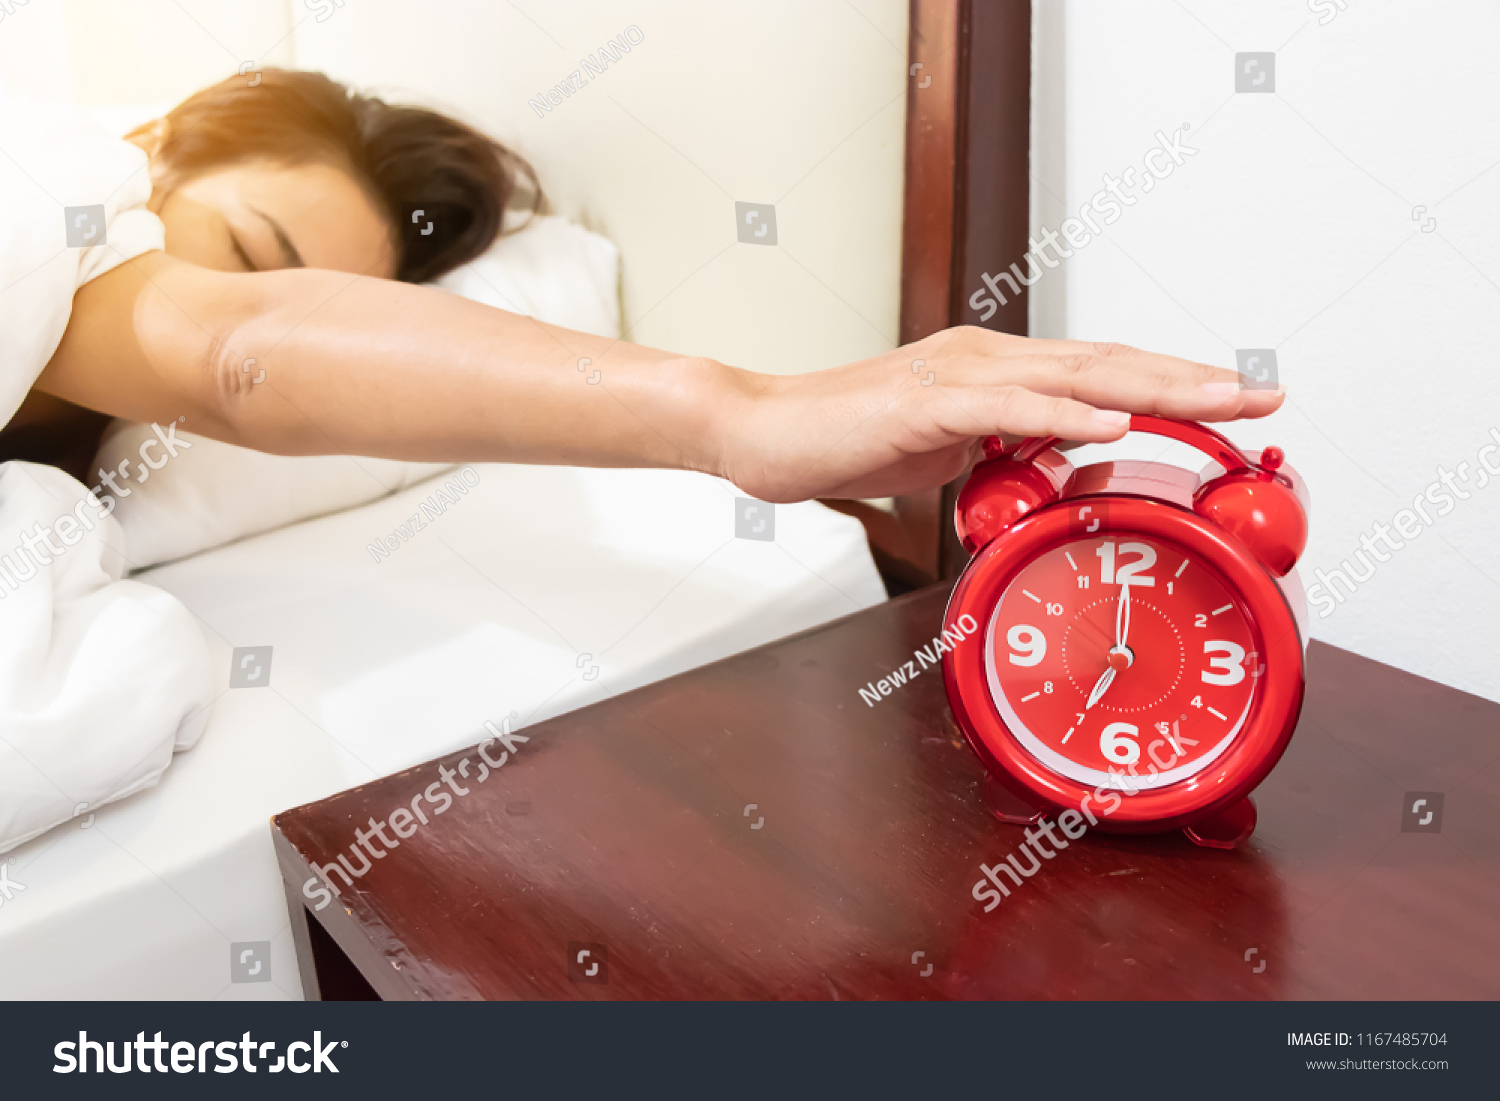 stock-photo-asian-girl-in-bed-reaching-out-to-pick-up-a-red-alarm-clock-on-the-table-wood-in-the-morning-1167485704.jpg